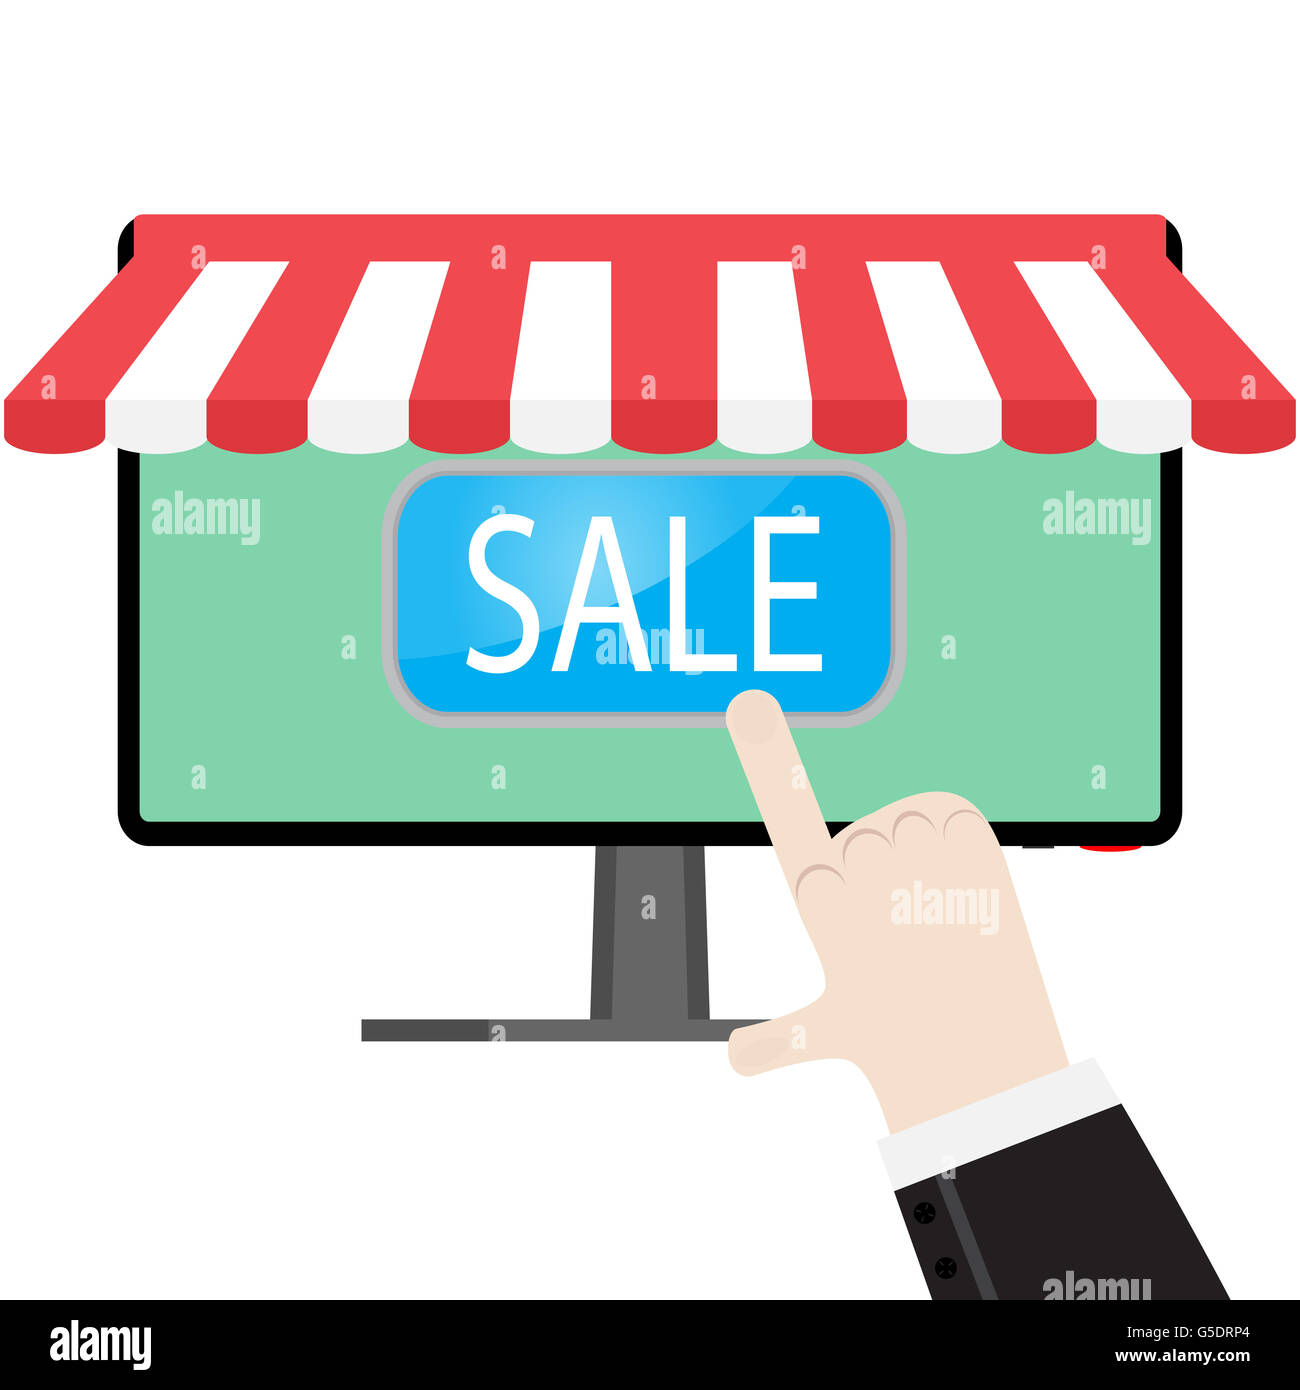 Make online purchases. Online shopping and order online, vector illustration Stock Photo